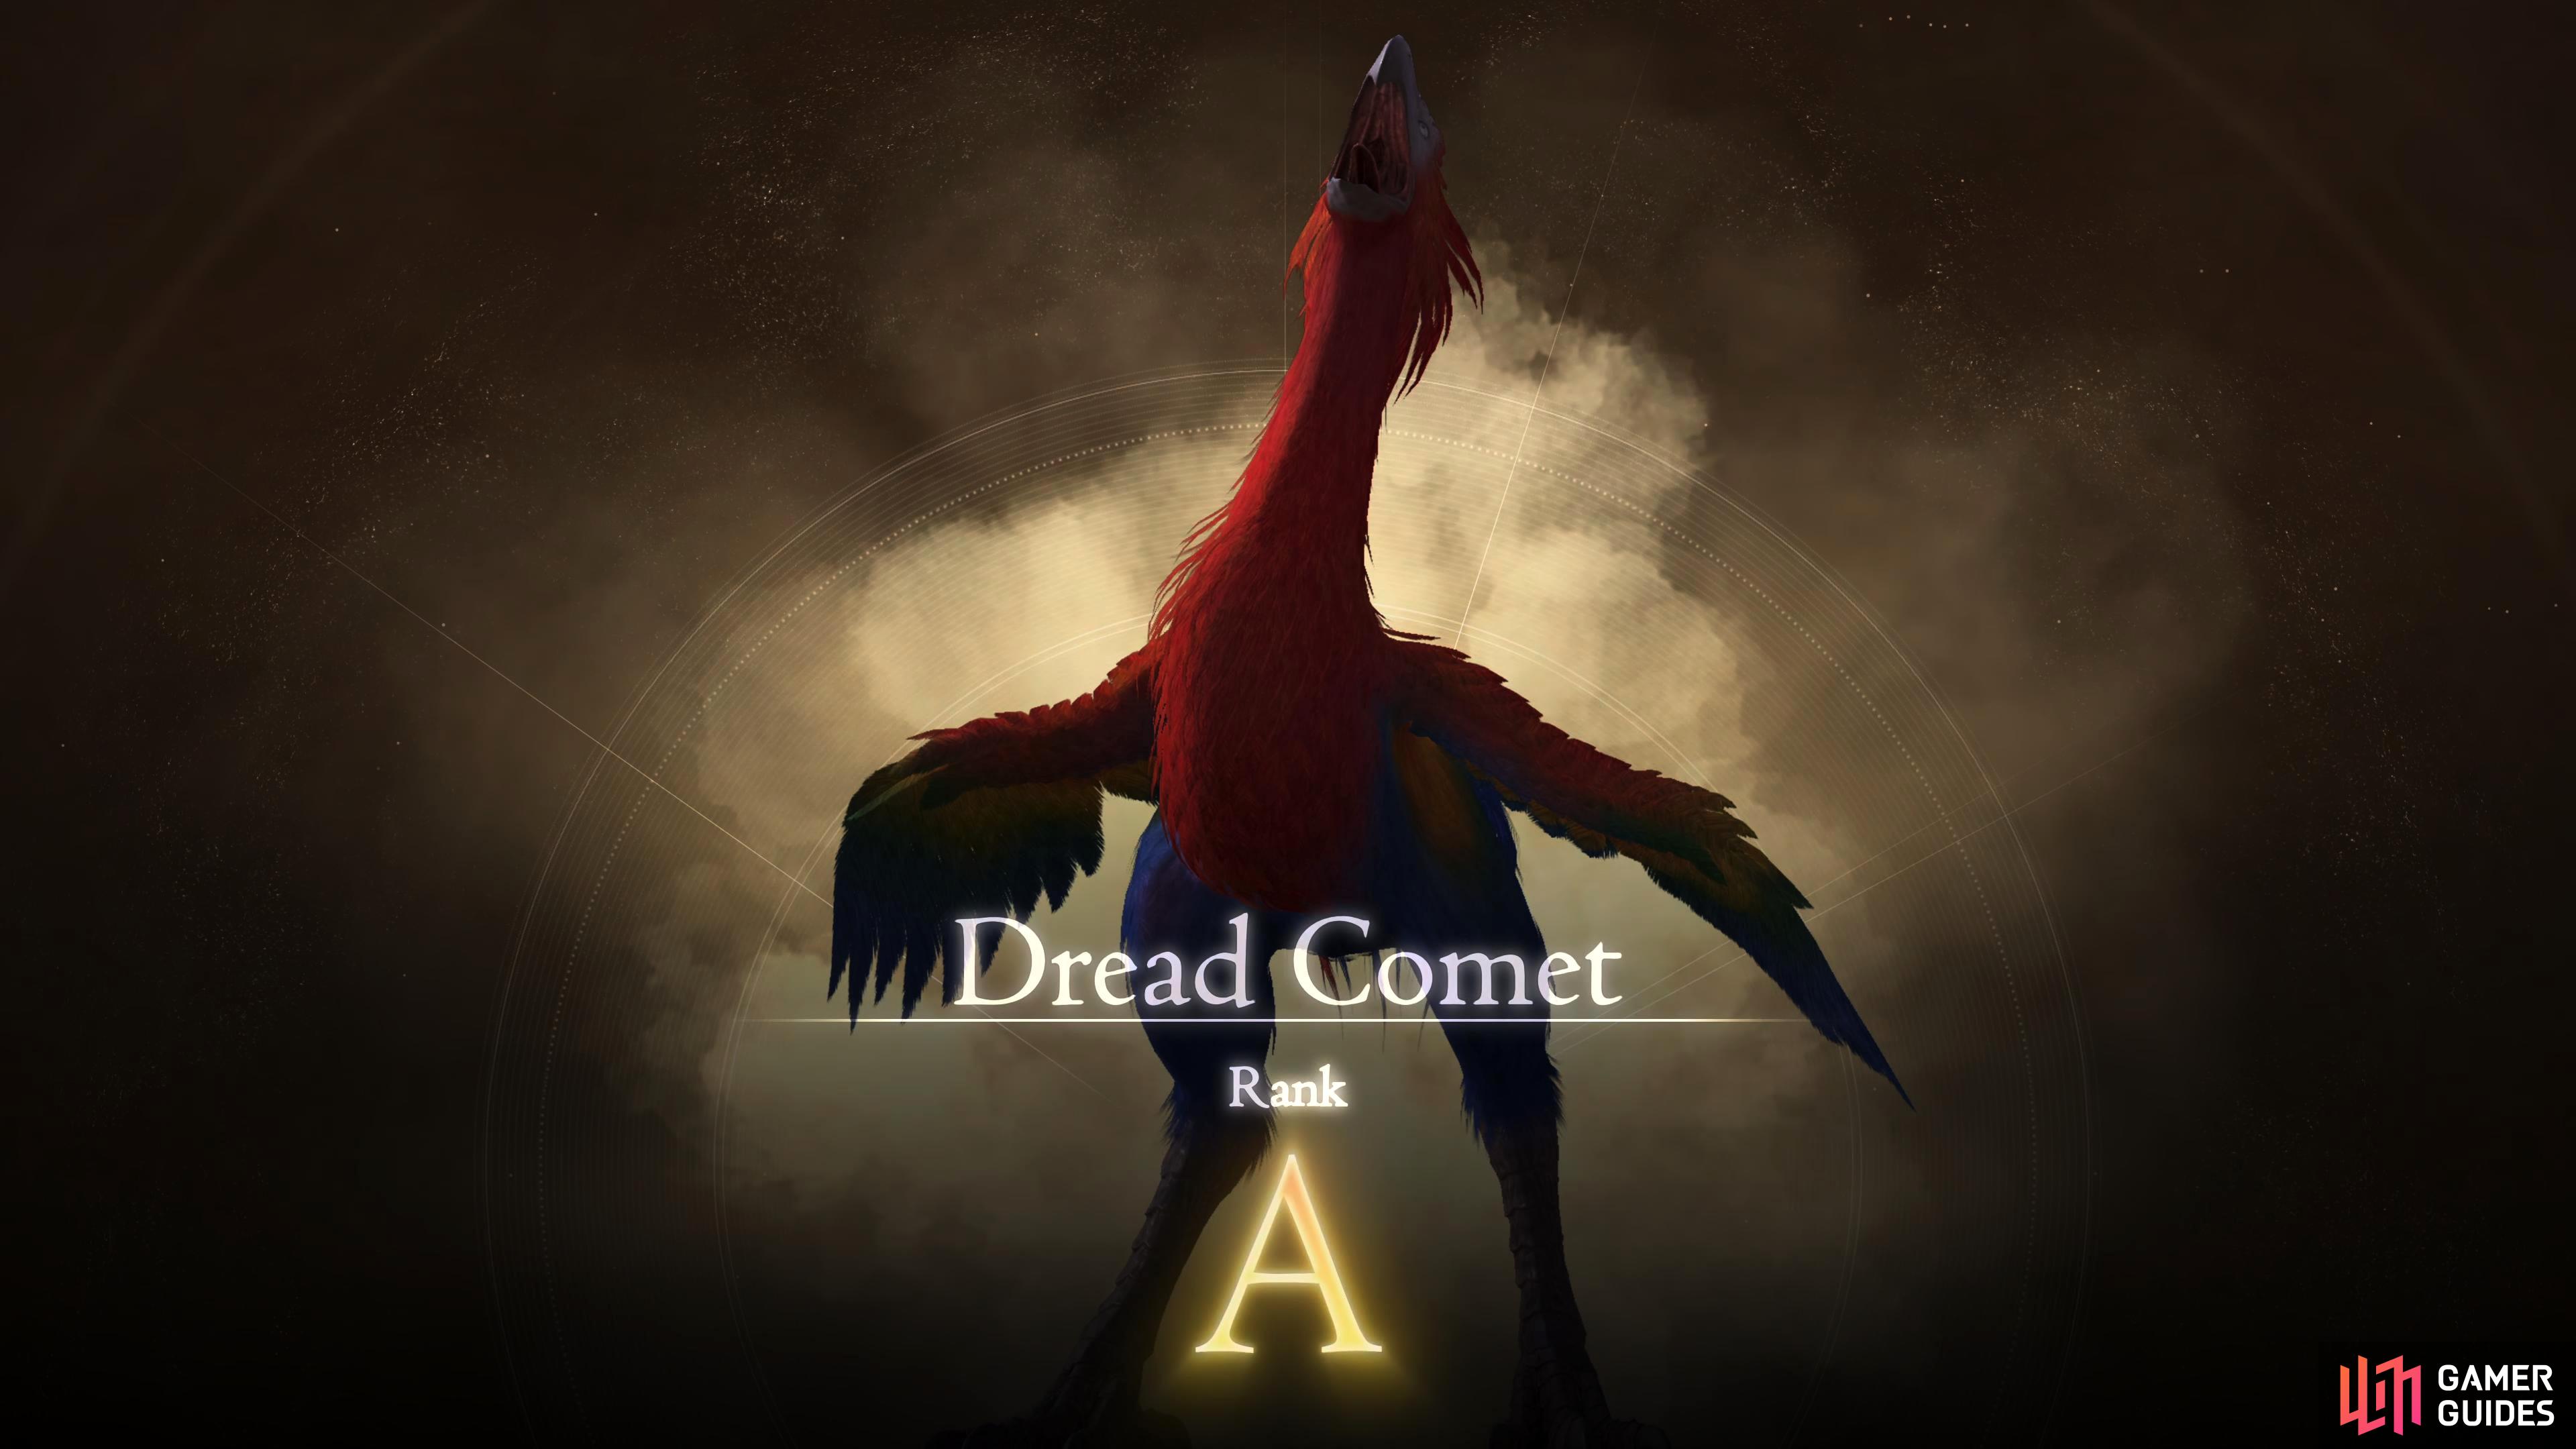 Dread Comet becomes available during the Song of Hope main story quest.